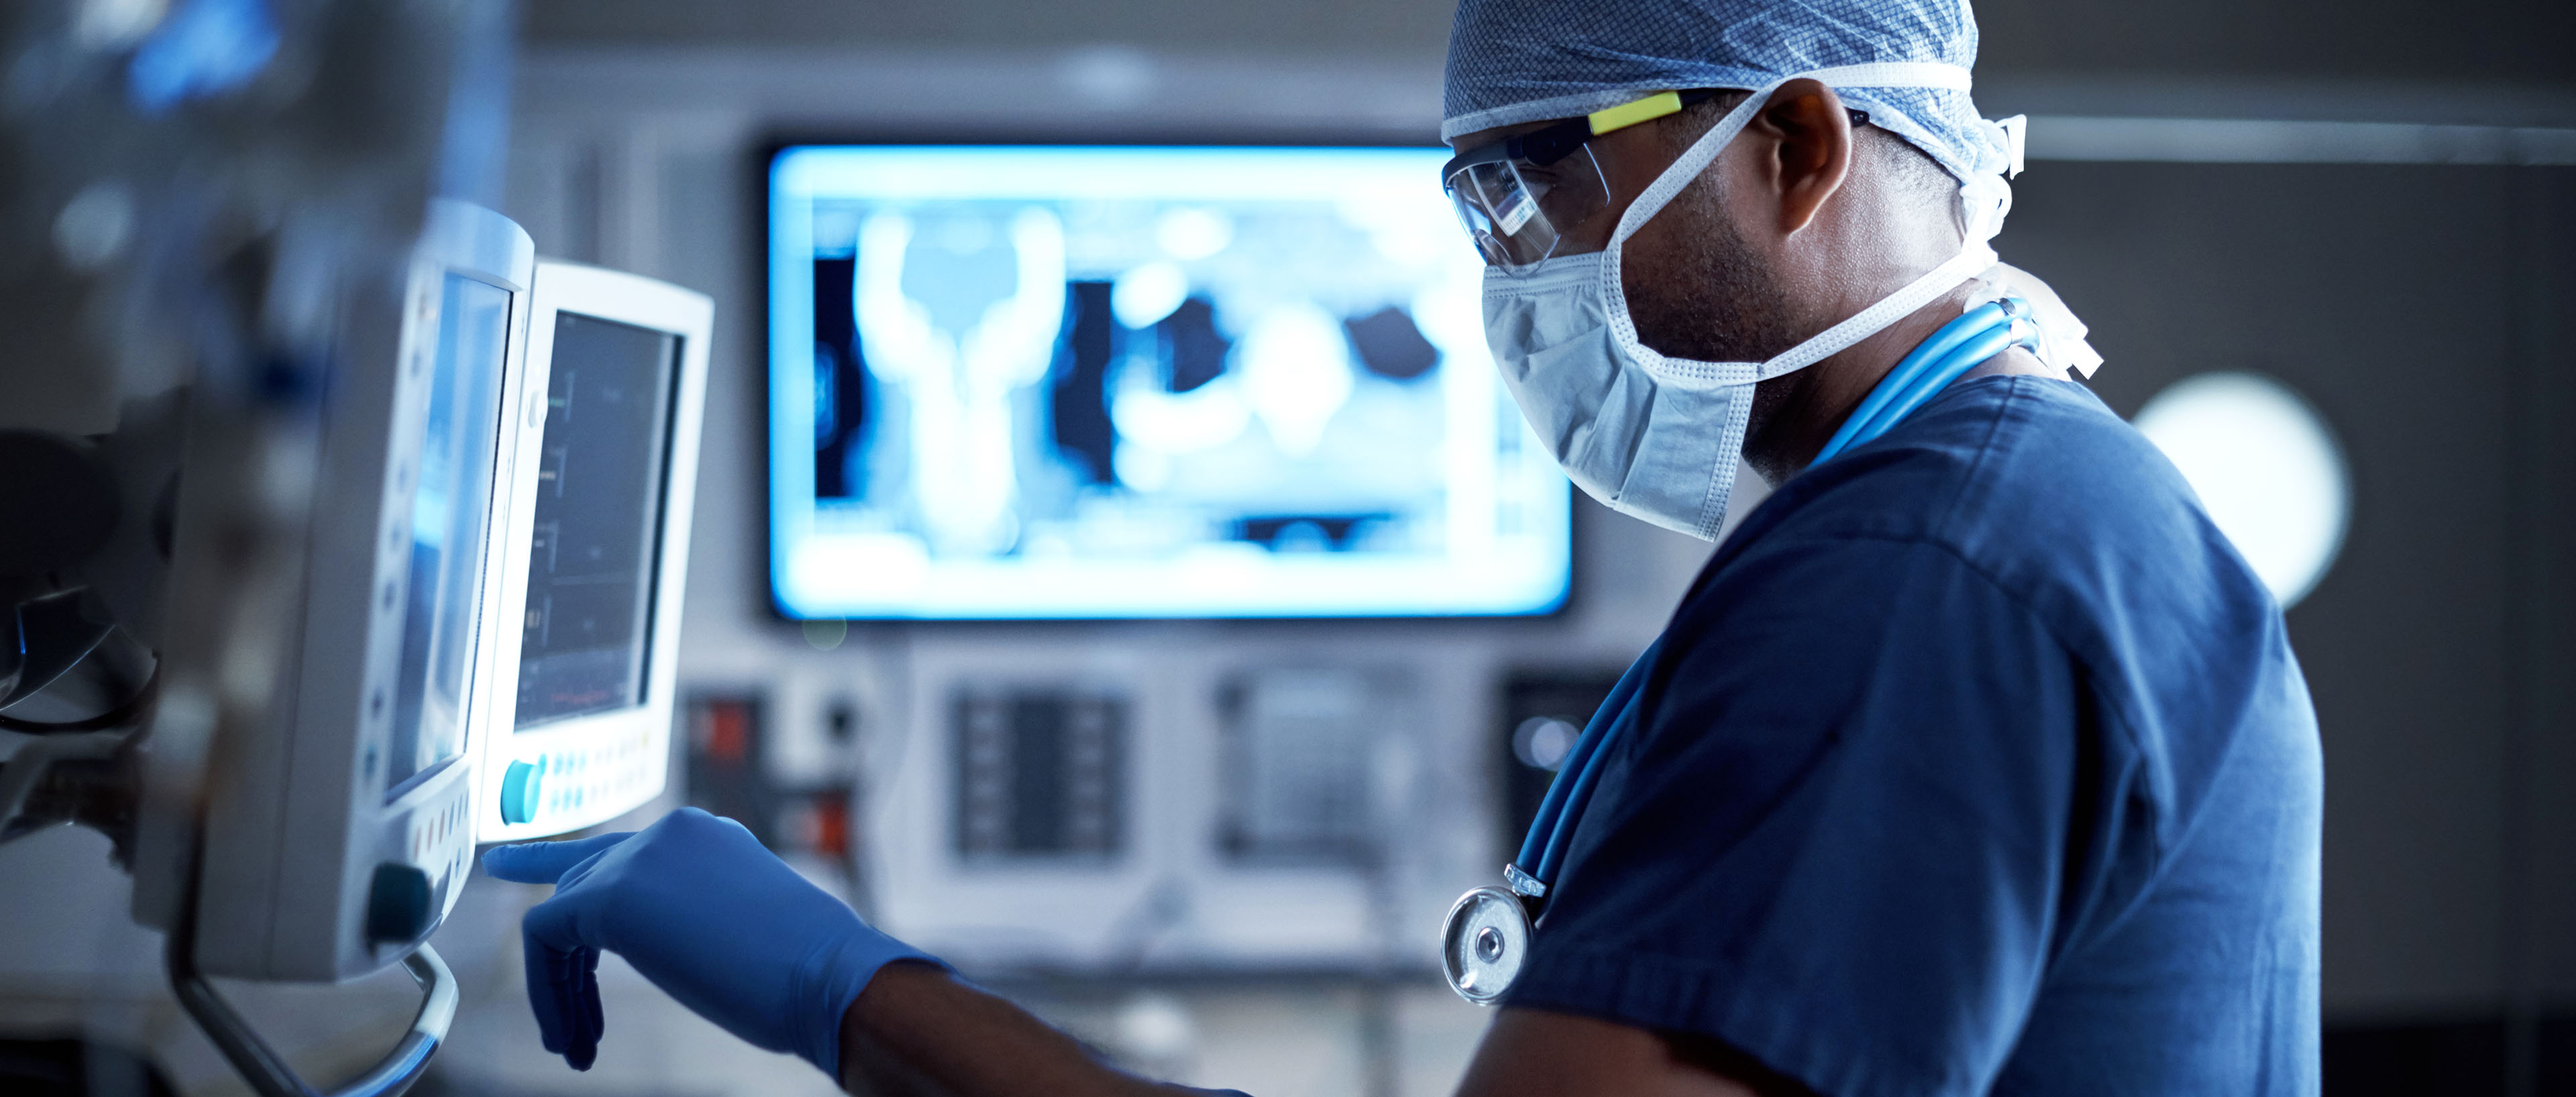 Surgeon looking at a monitor in an operating room